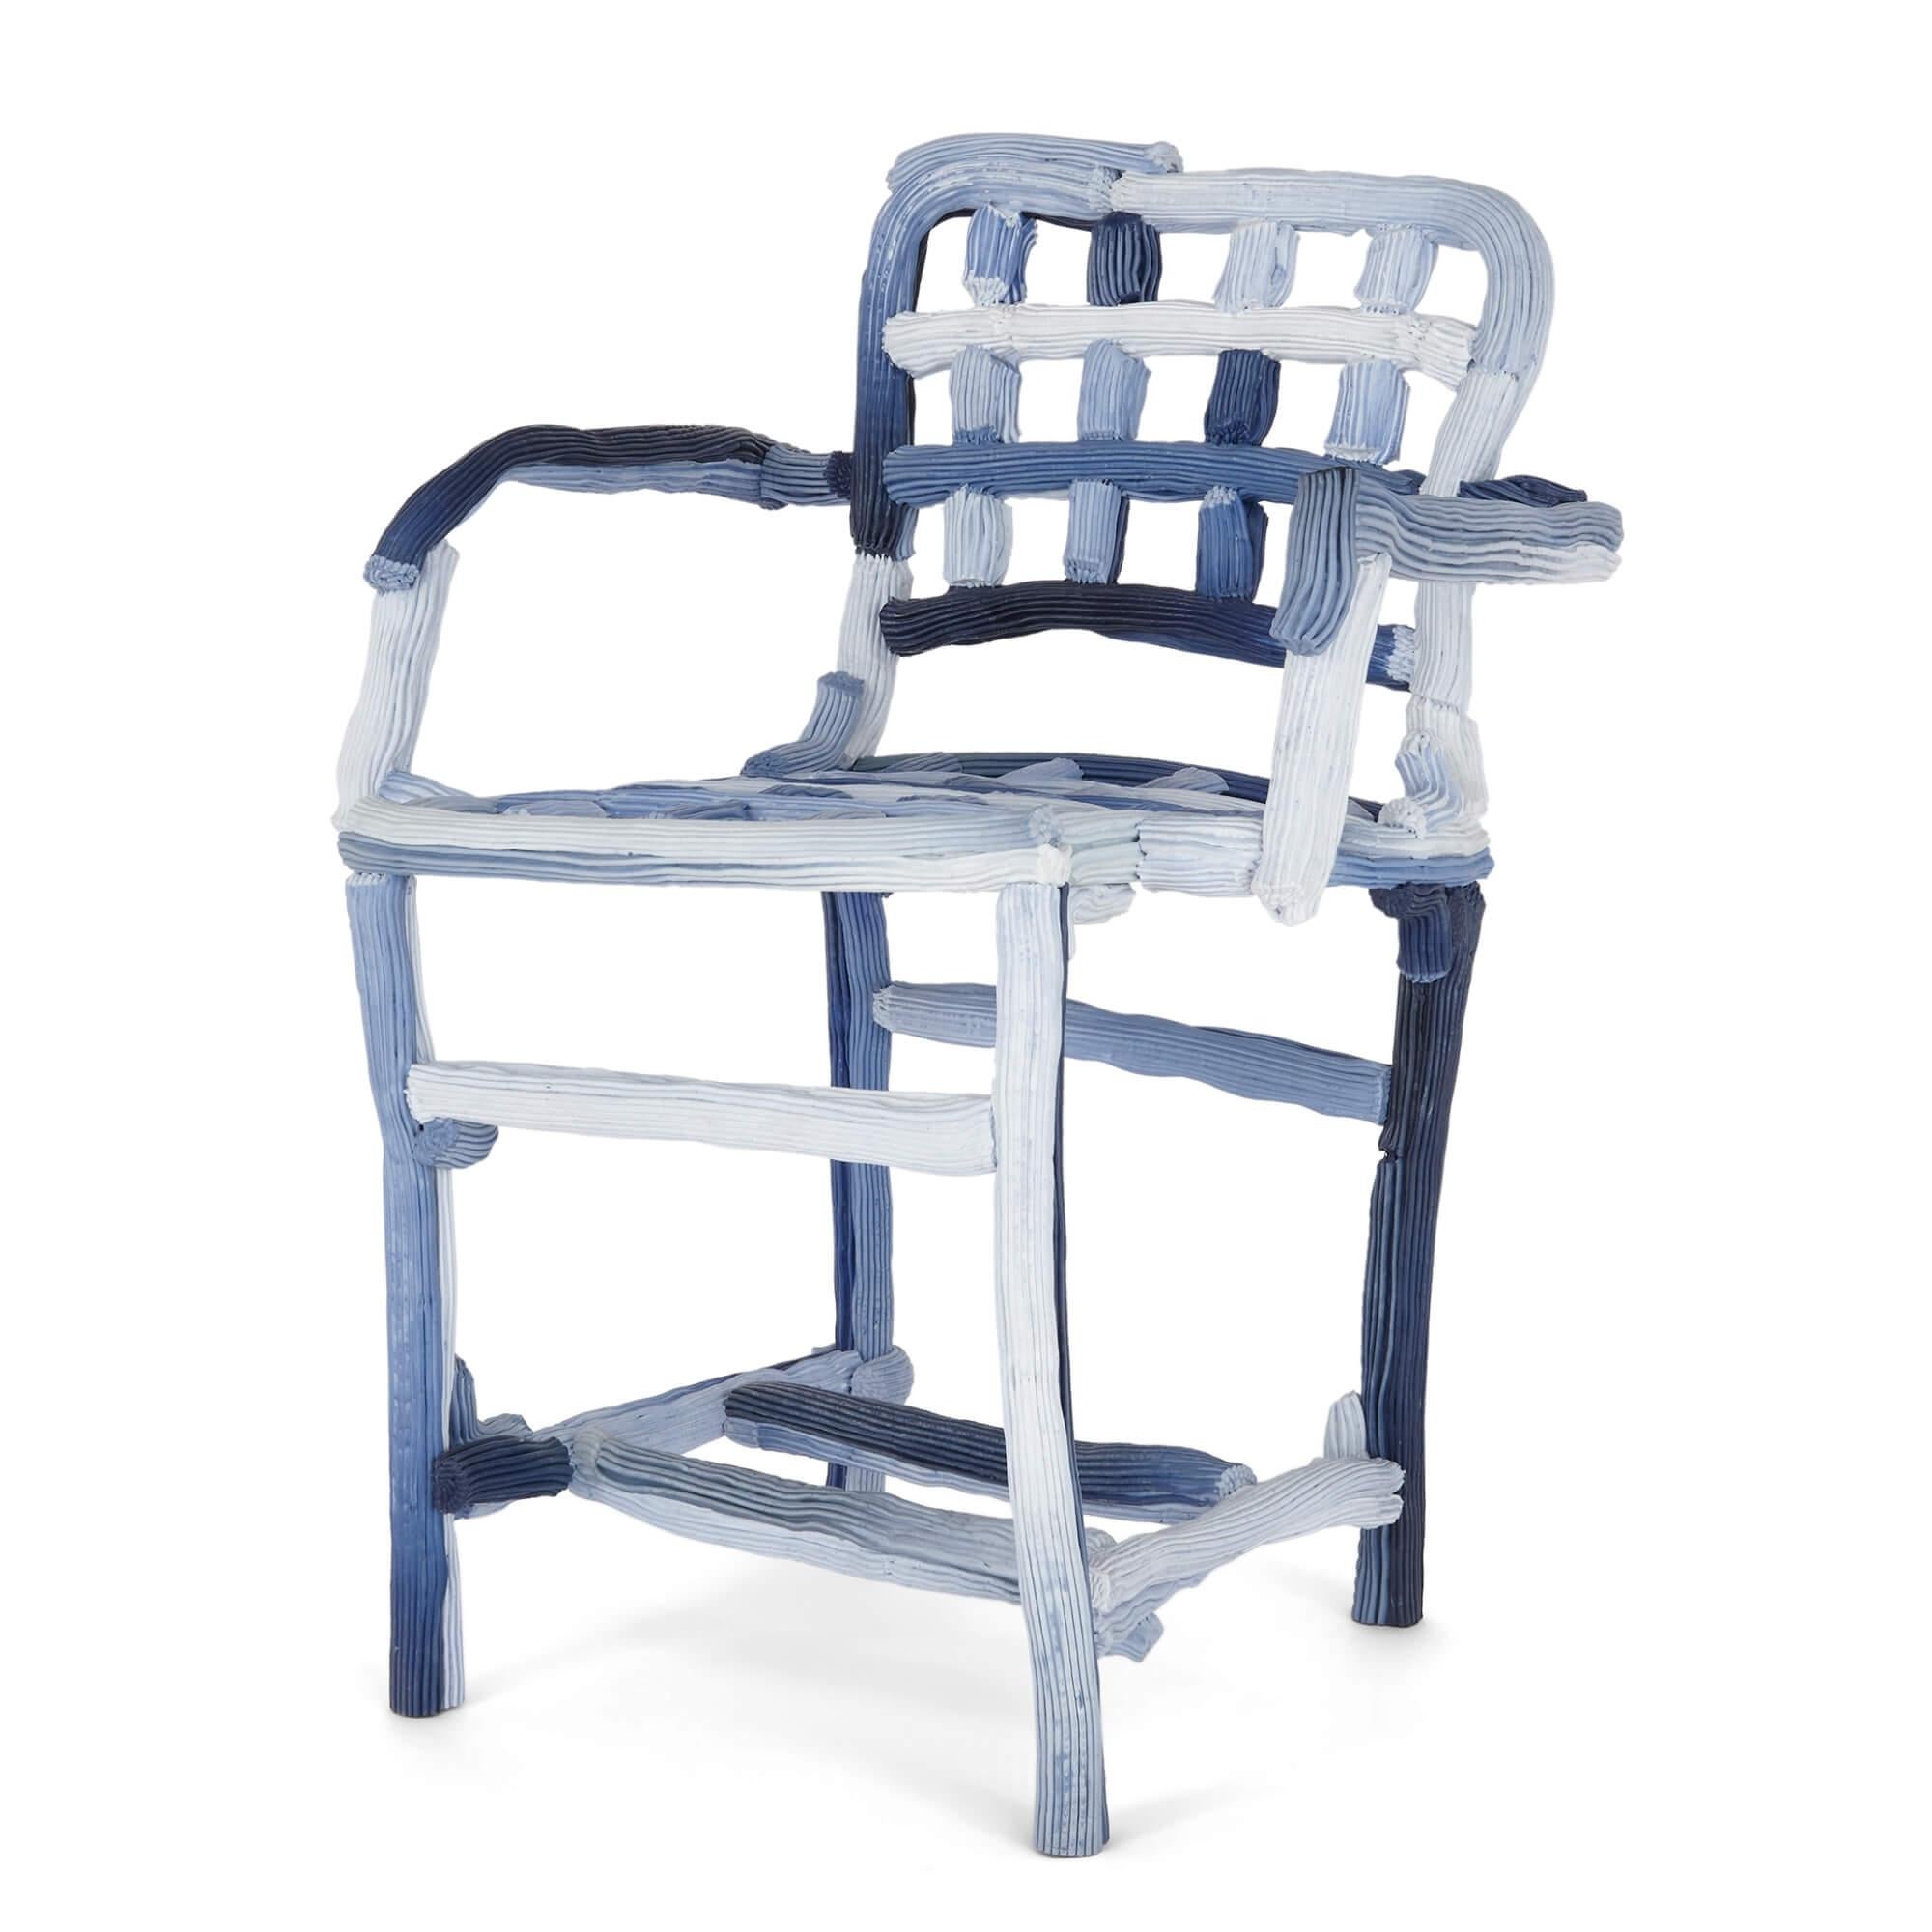 Contemporary recycled plastic chair by James Shaw 
English, 2020
Height 78cm, width 58cm, depth 49cm

Designed and made by James Shaw, the renowned English contemporary designer and maker, the chair is a playful take on the design of a utilitarian